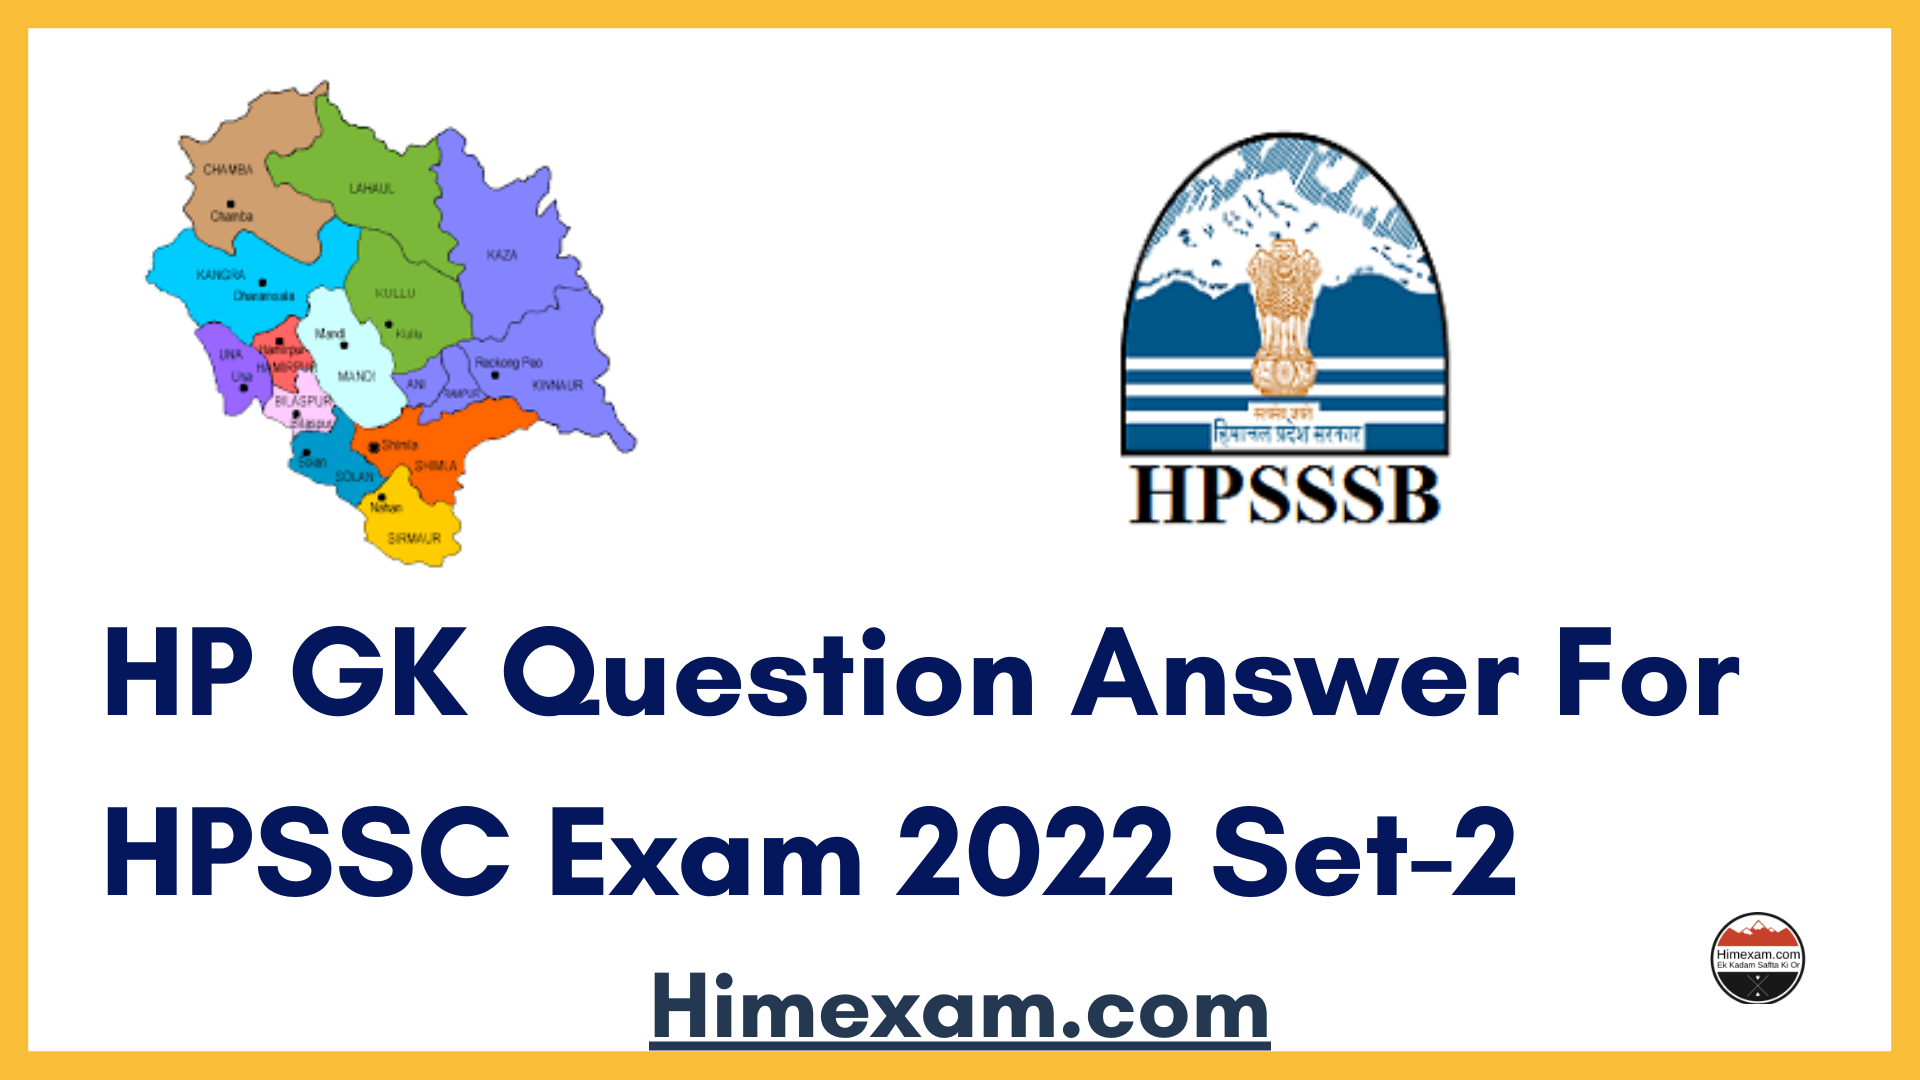 HP GK Question Answer For HPSSC Exam 2022 Set-2